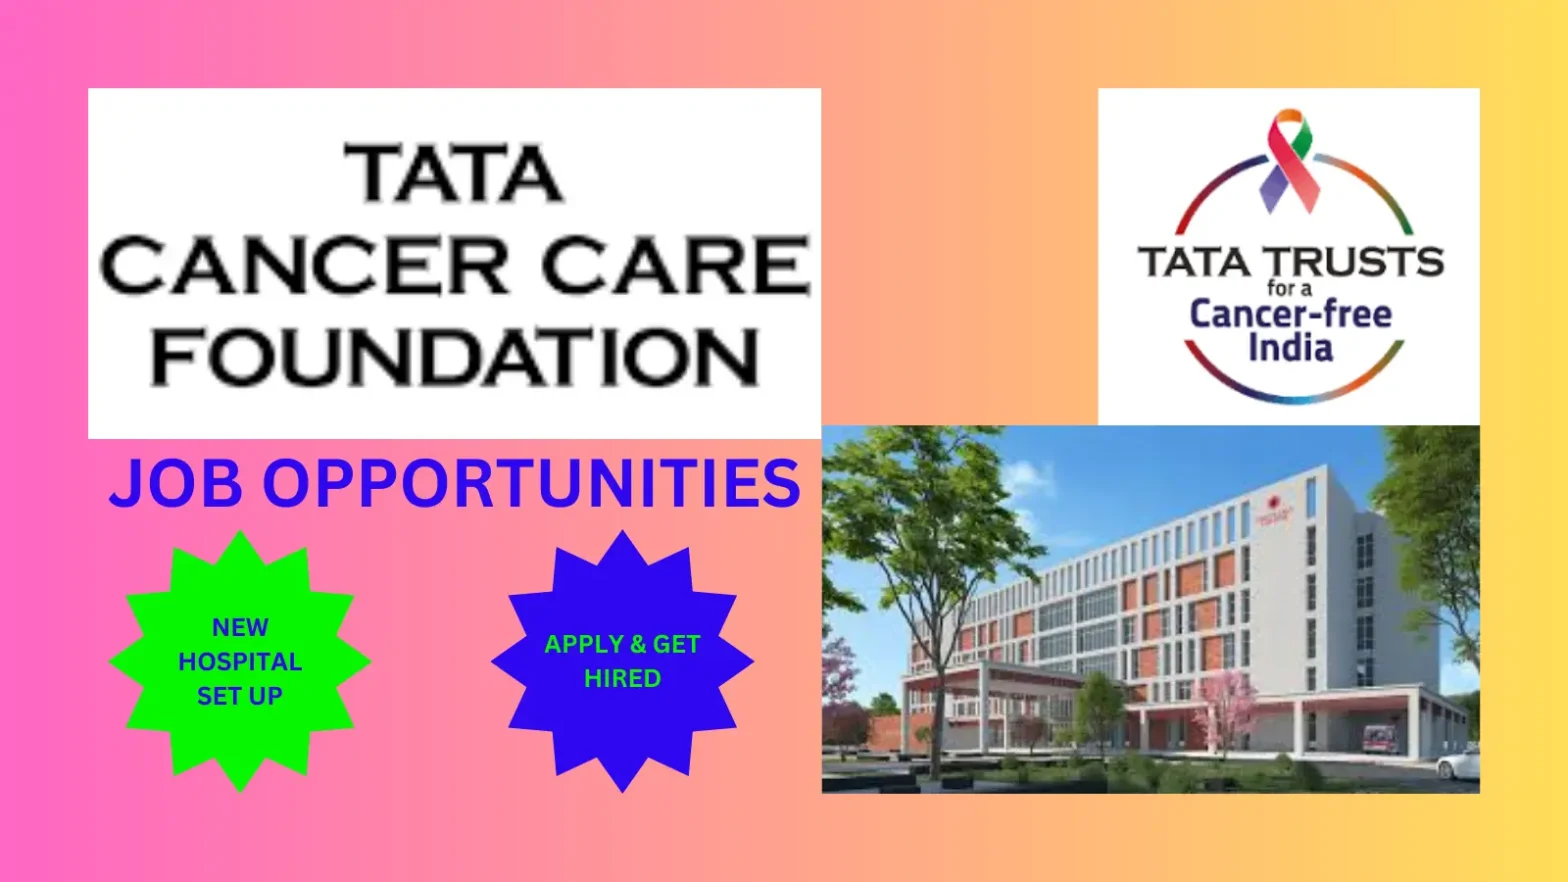 Tata Cancer Care Foundation. Get hired.